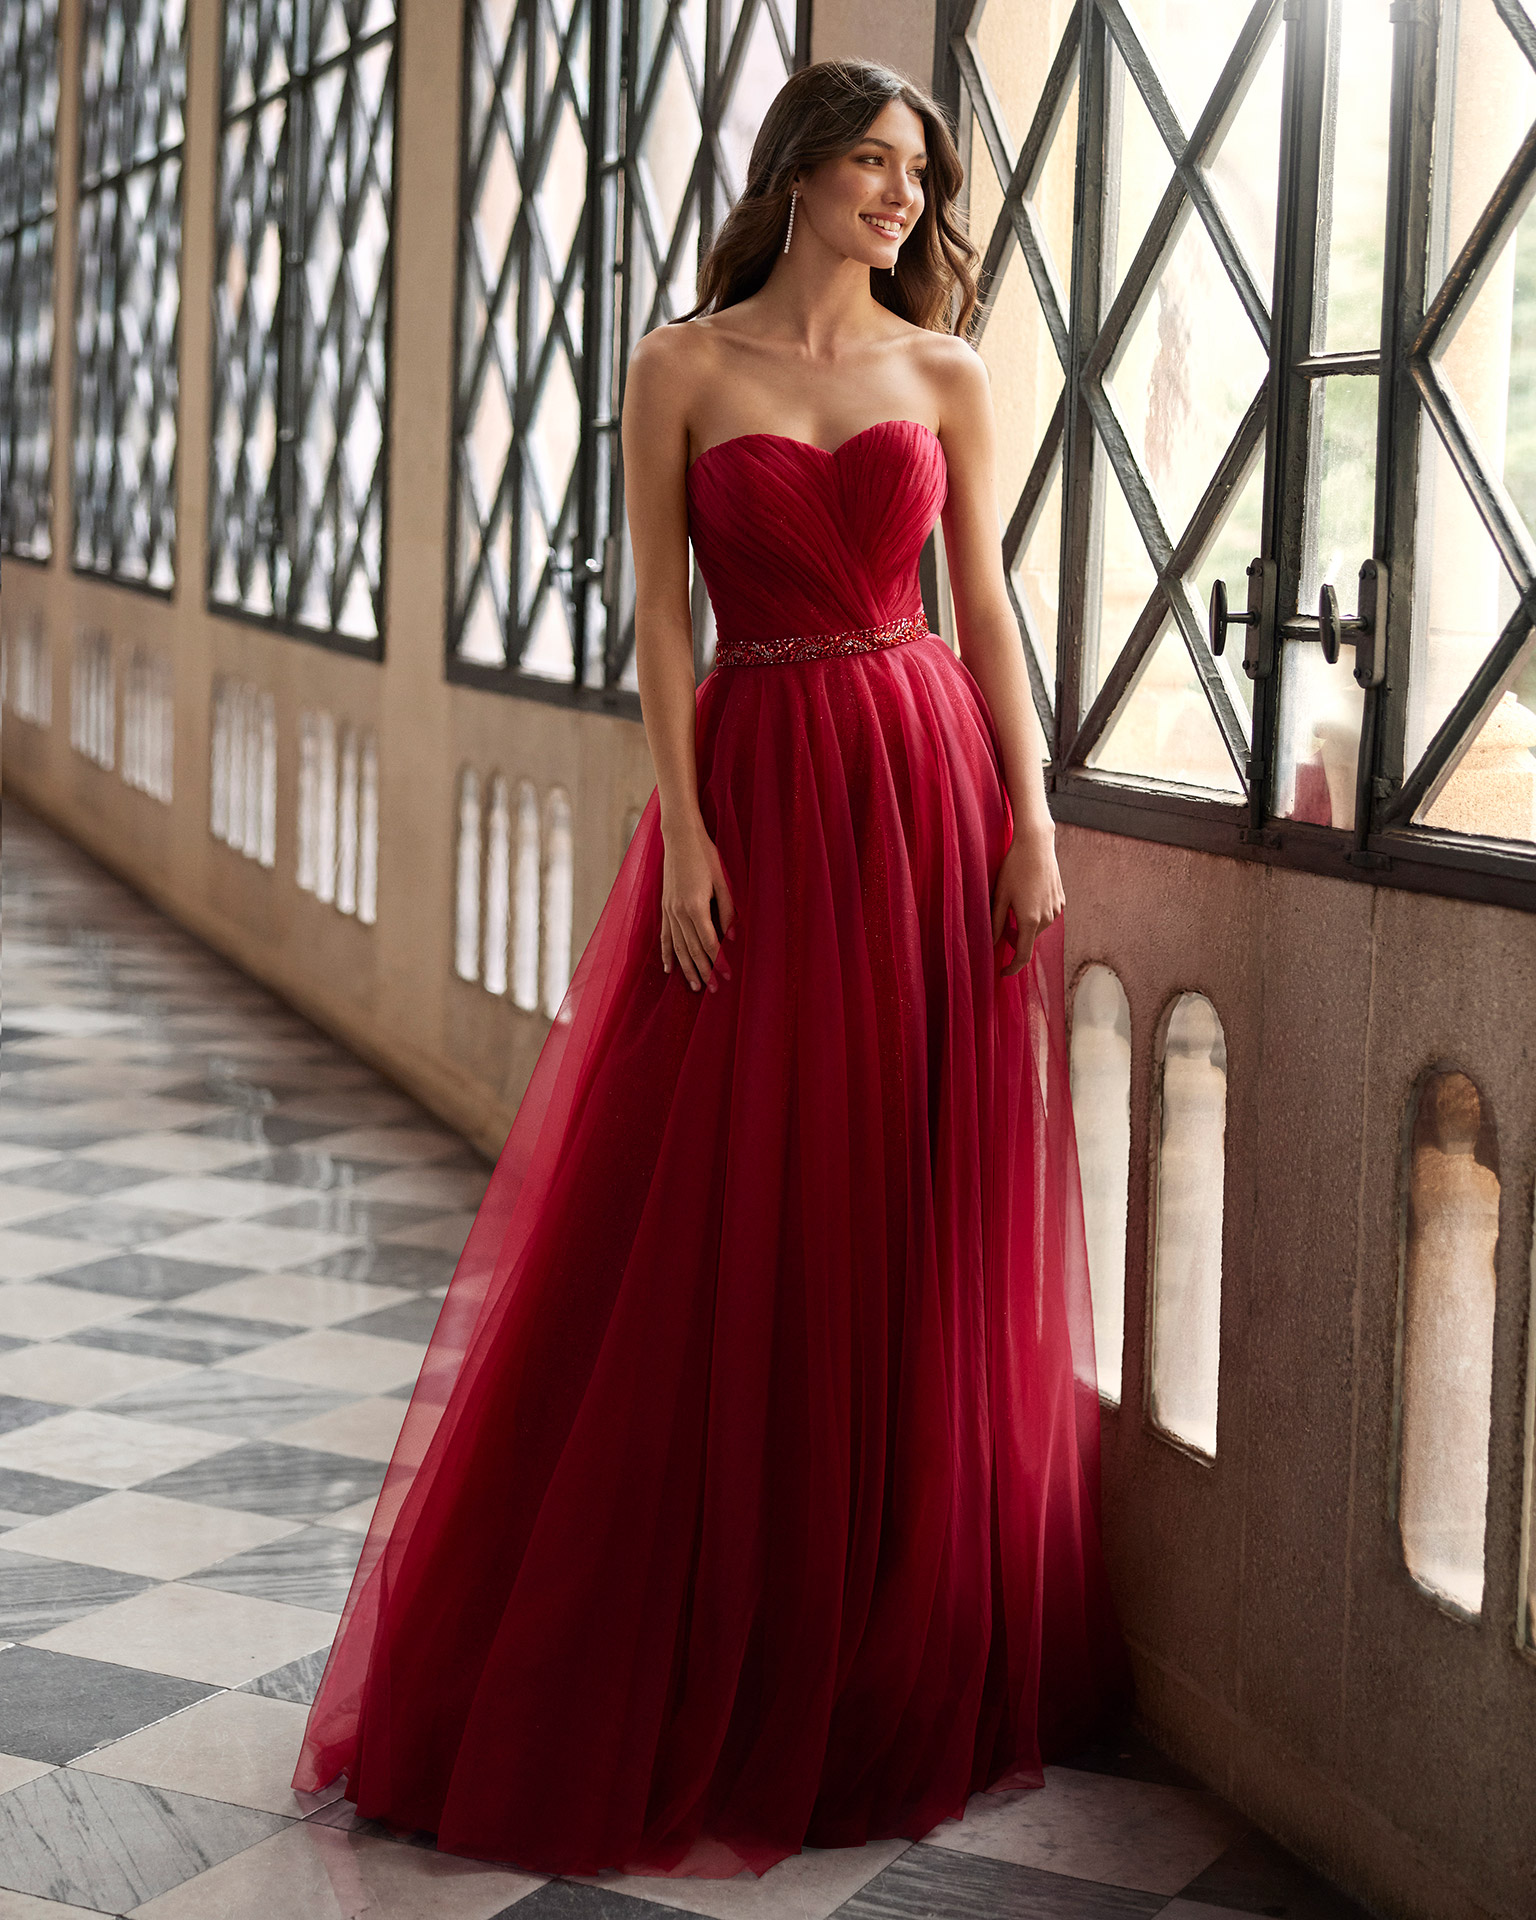 Elegant long evening dress made of tulle and glitter. Marfil Barcelona design with a sweetheart neckline, and an open back. MARFIL_BARCELONA.